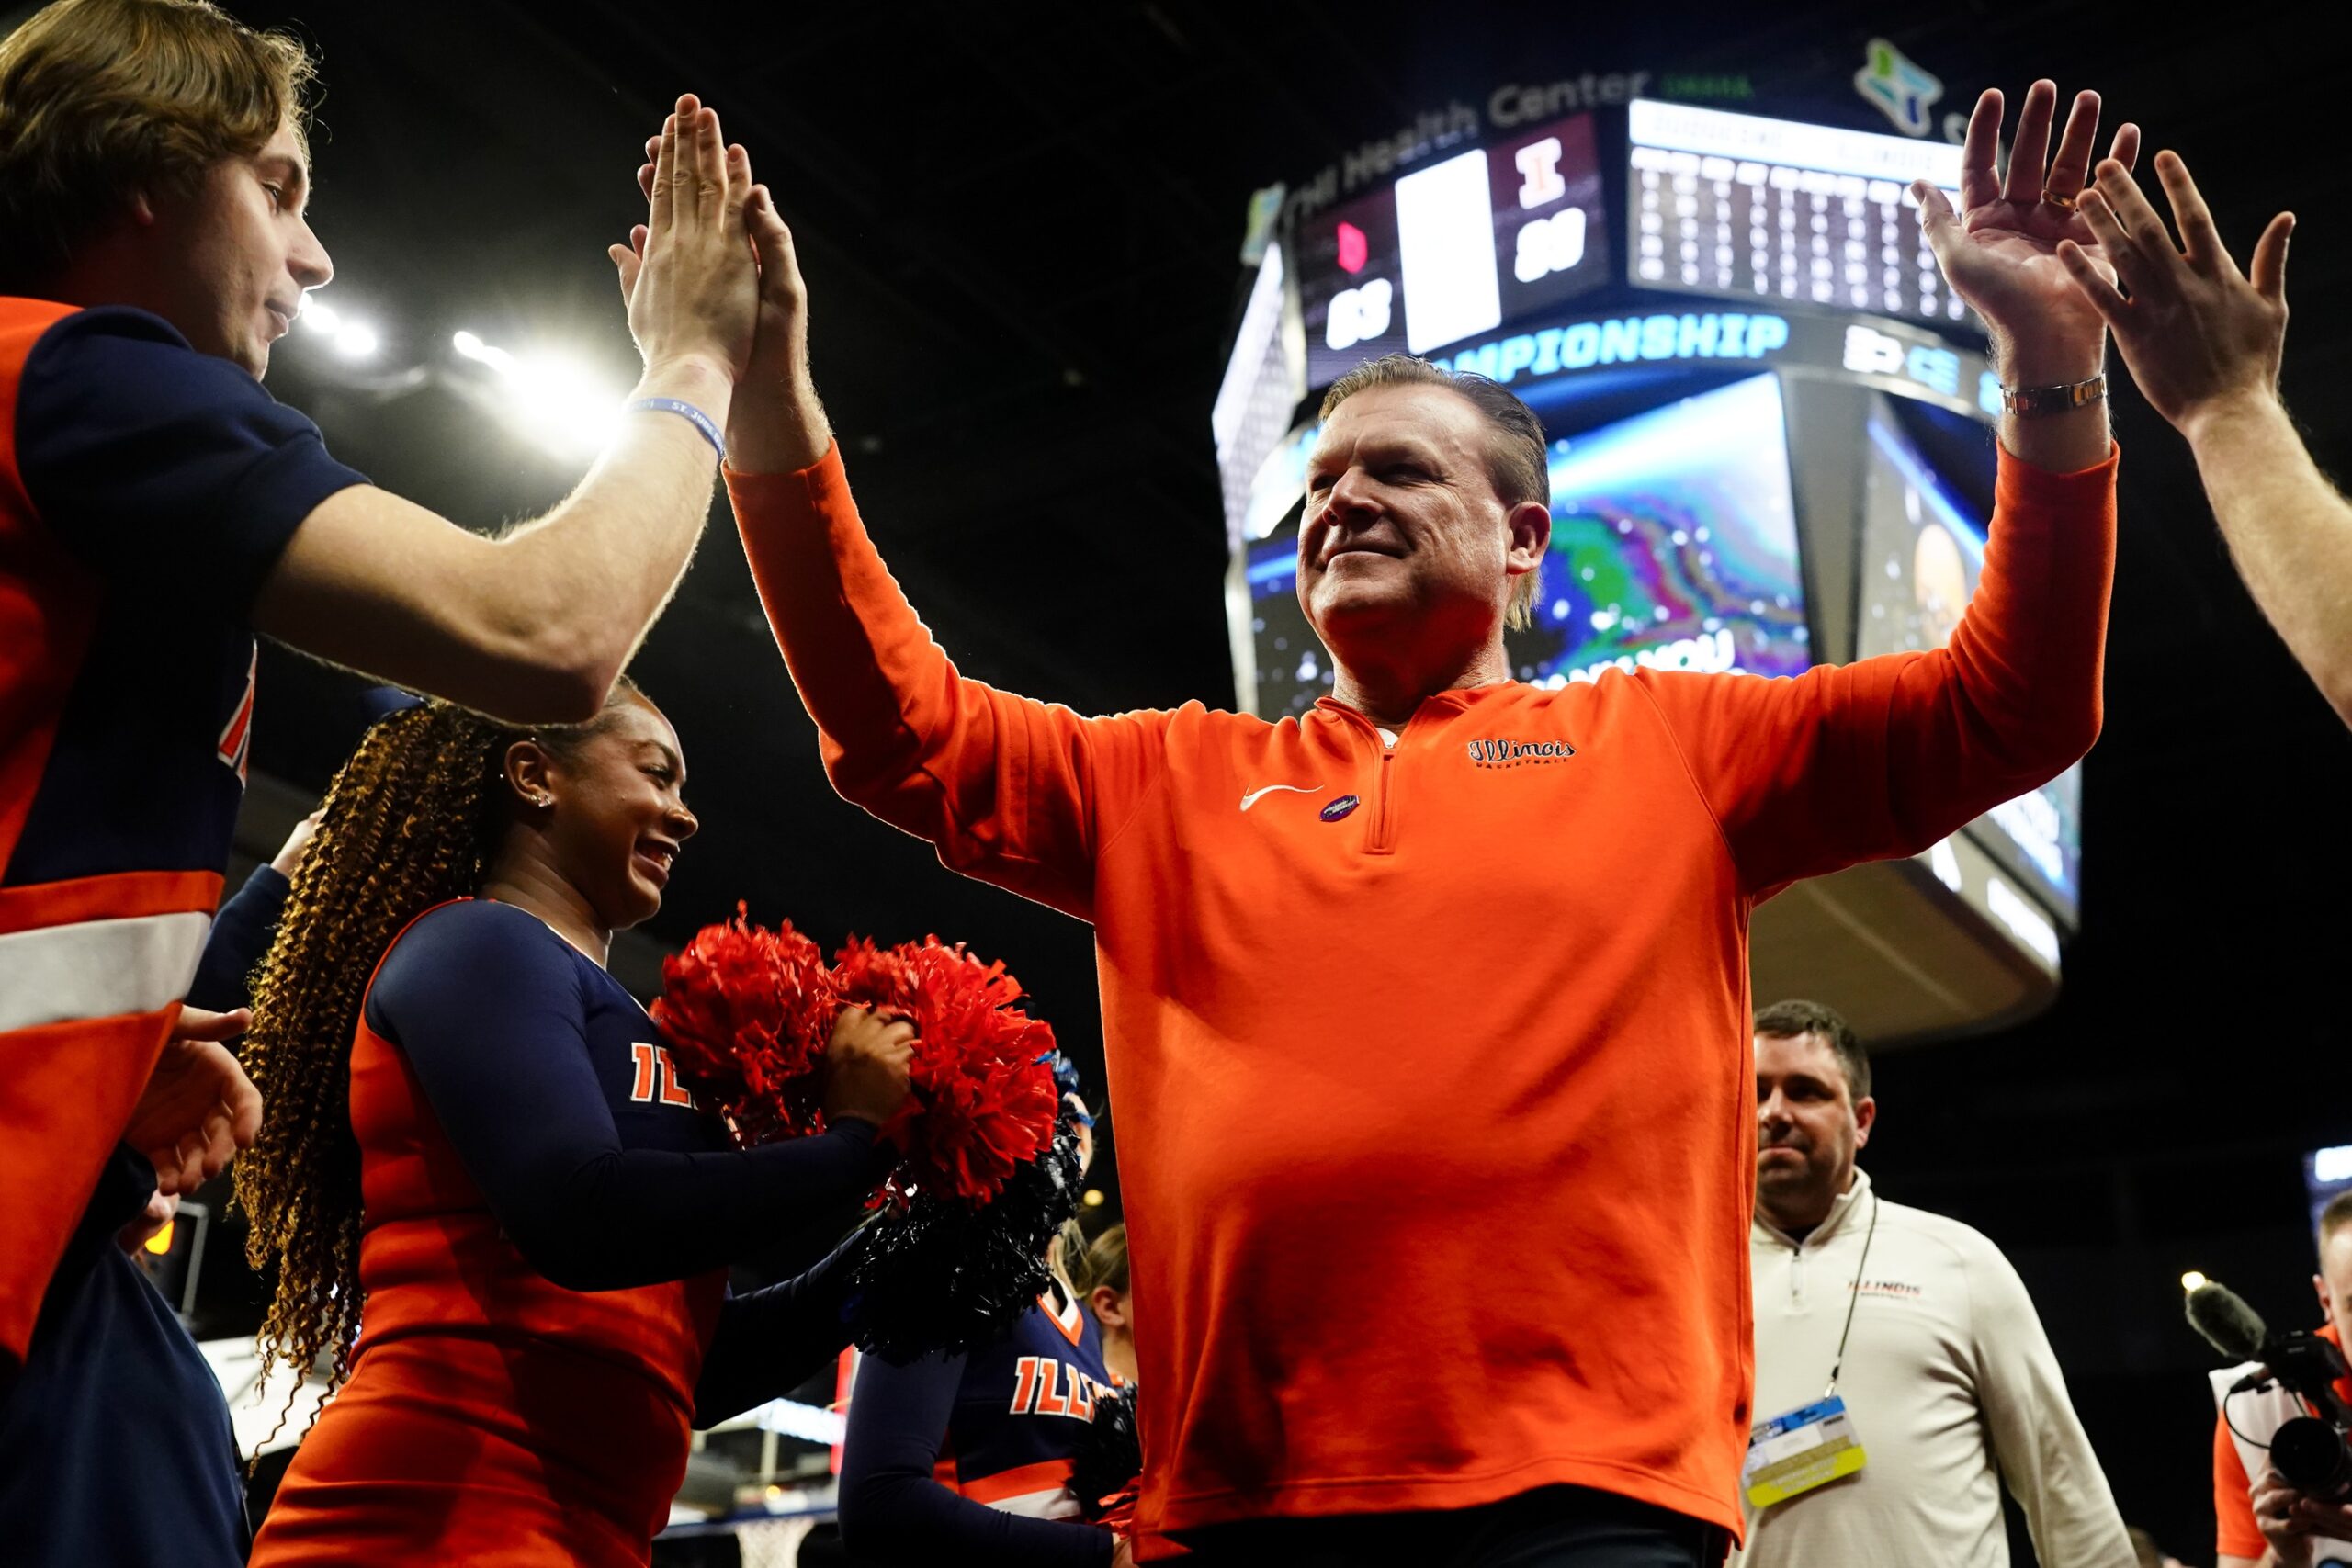 Brad Underwood and Illinois basketball are poised to have a strong season.